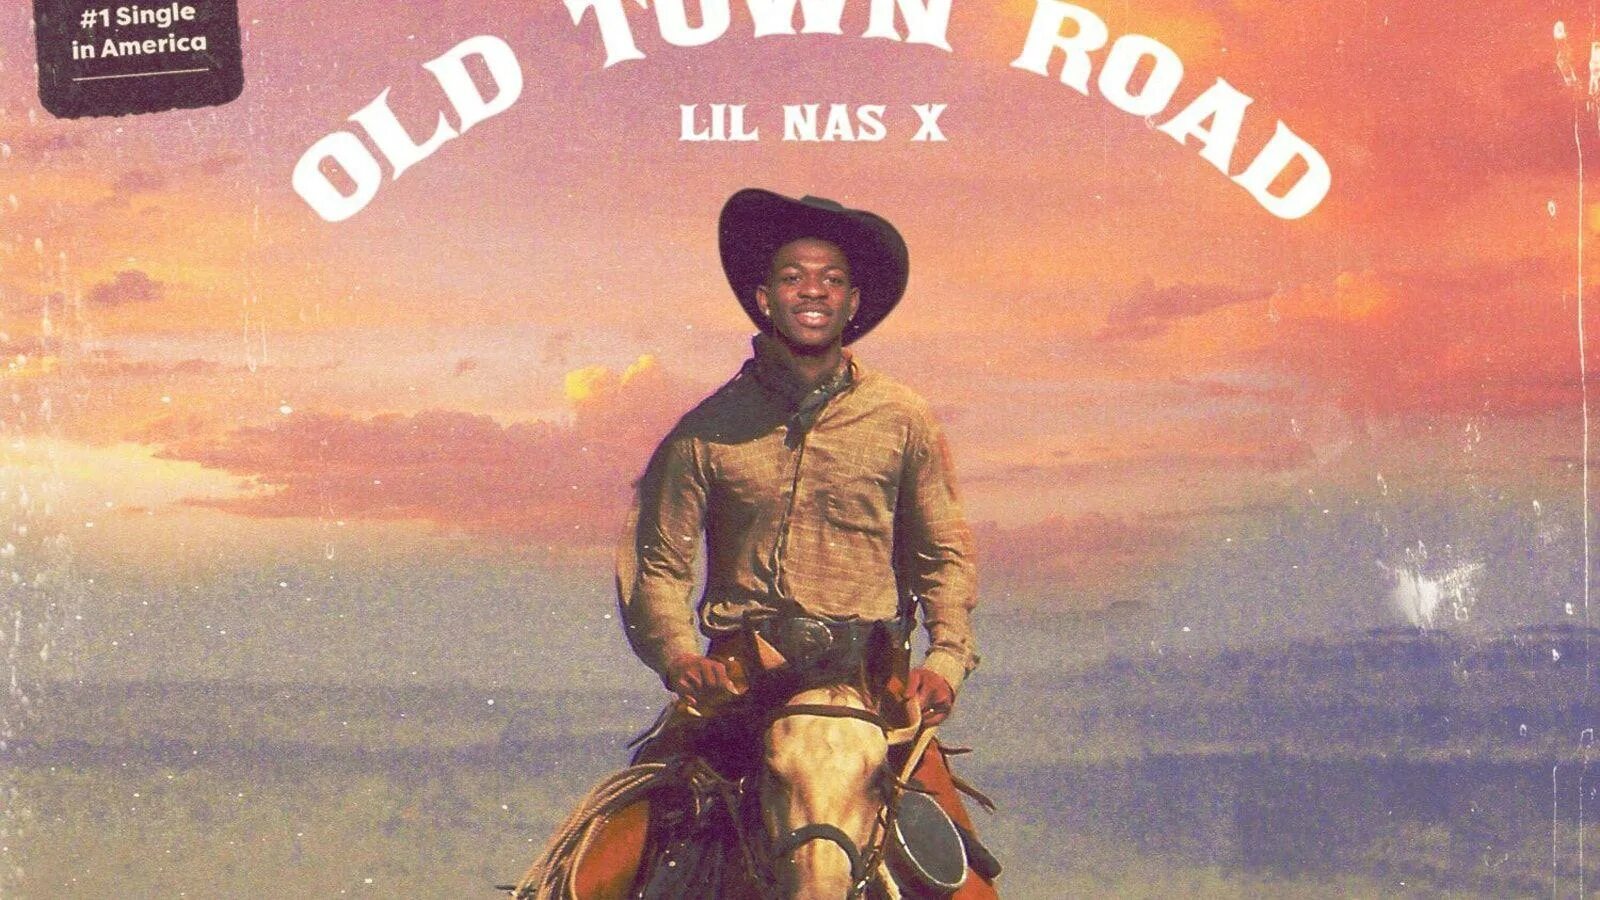 Lil nas x old Town Road. Old Town обложка. Old Town Road Lil nas x Billy ray Cyrus обложка.